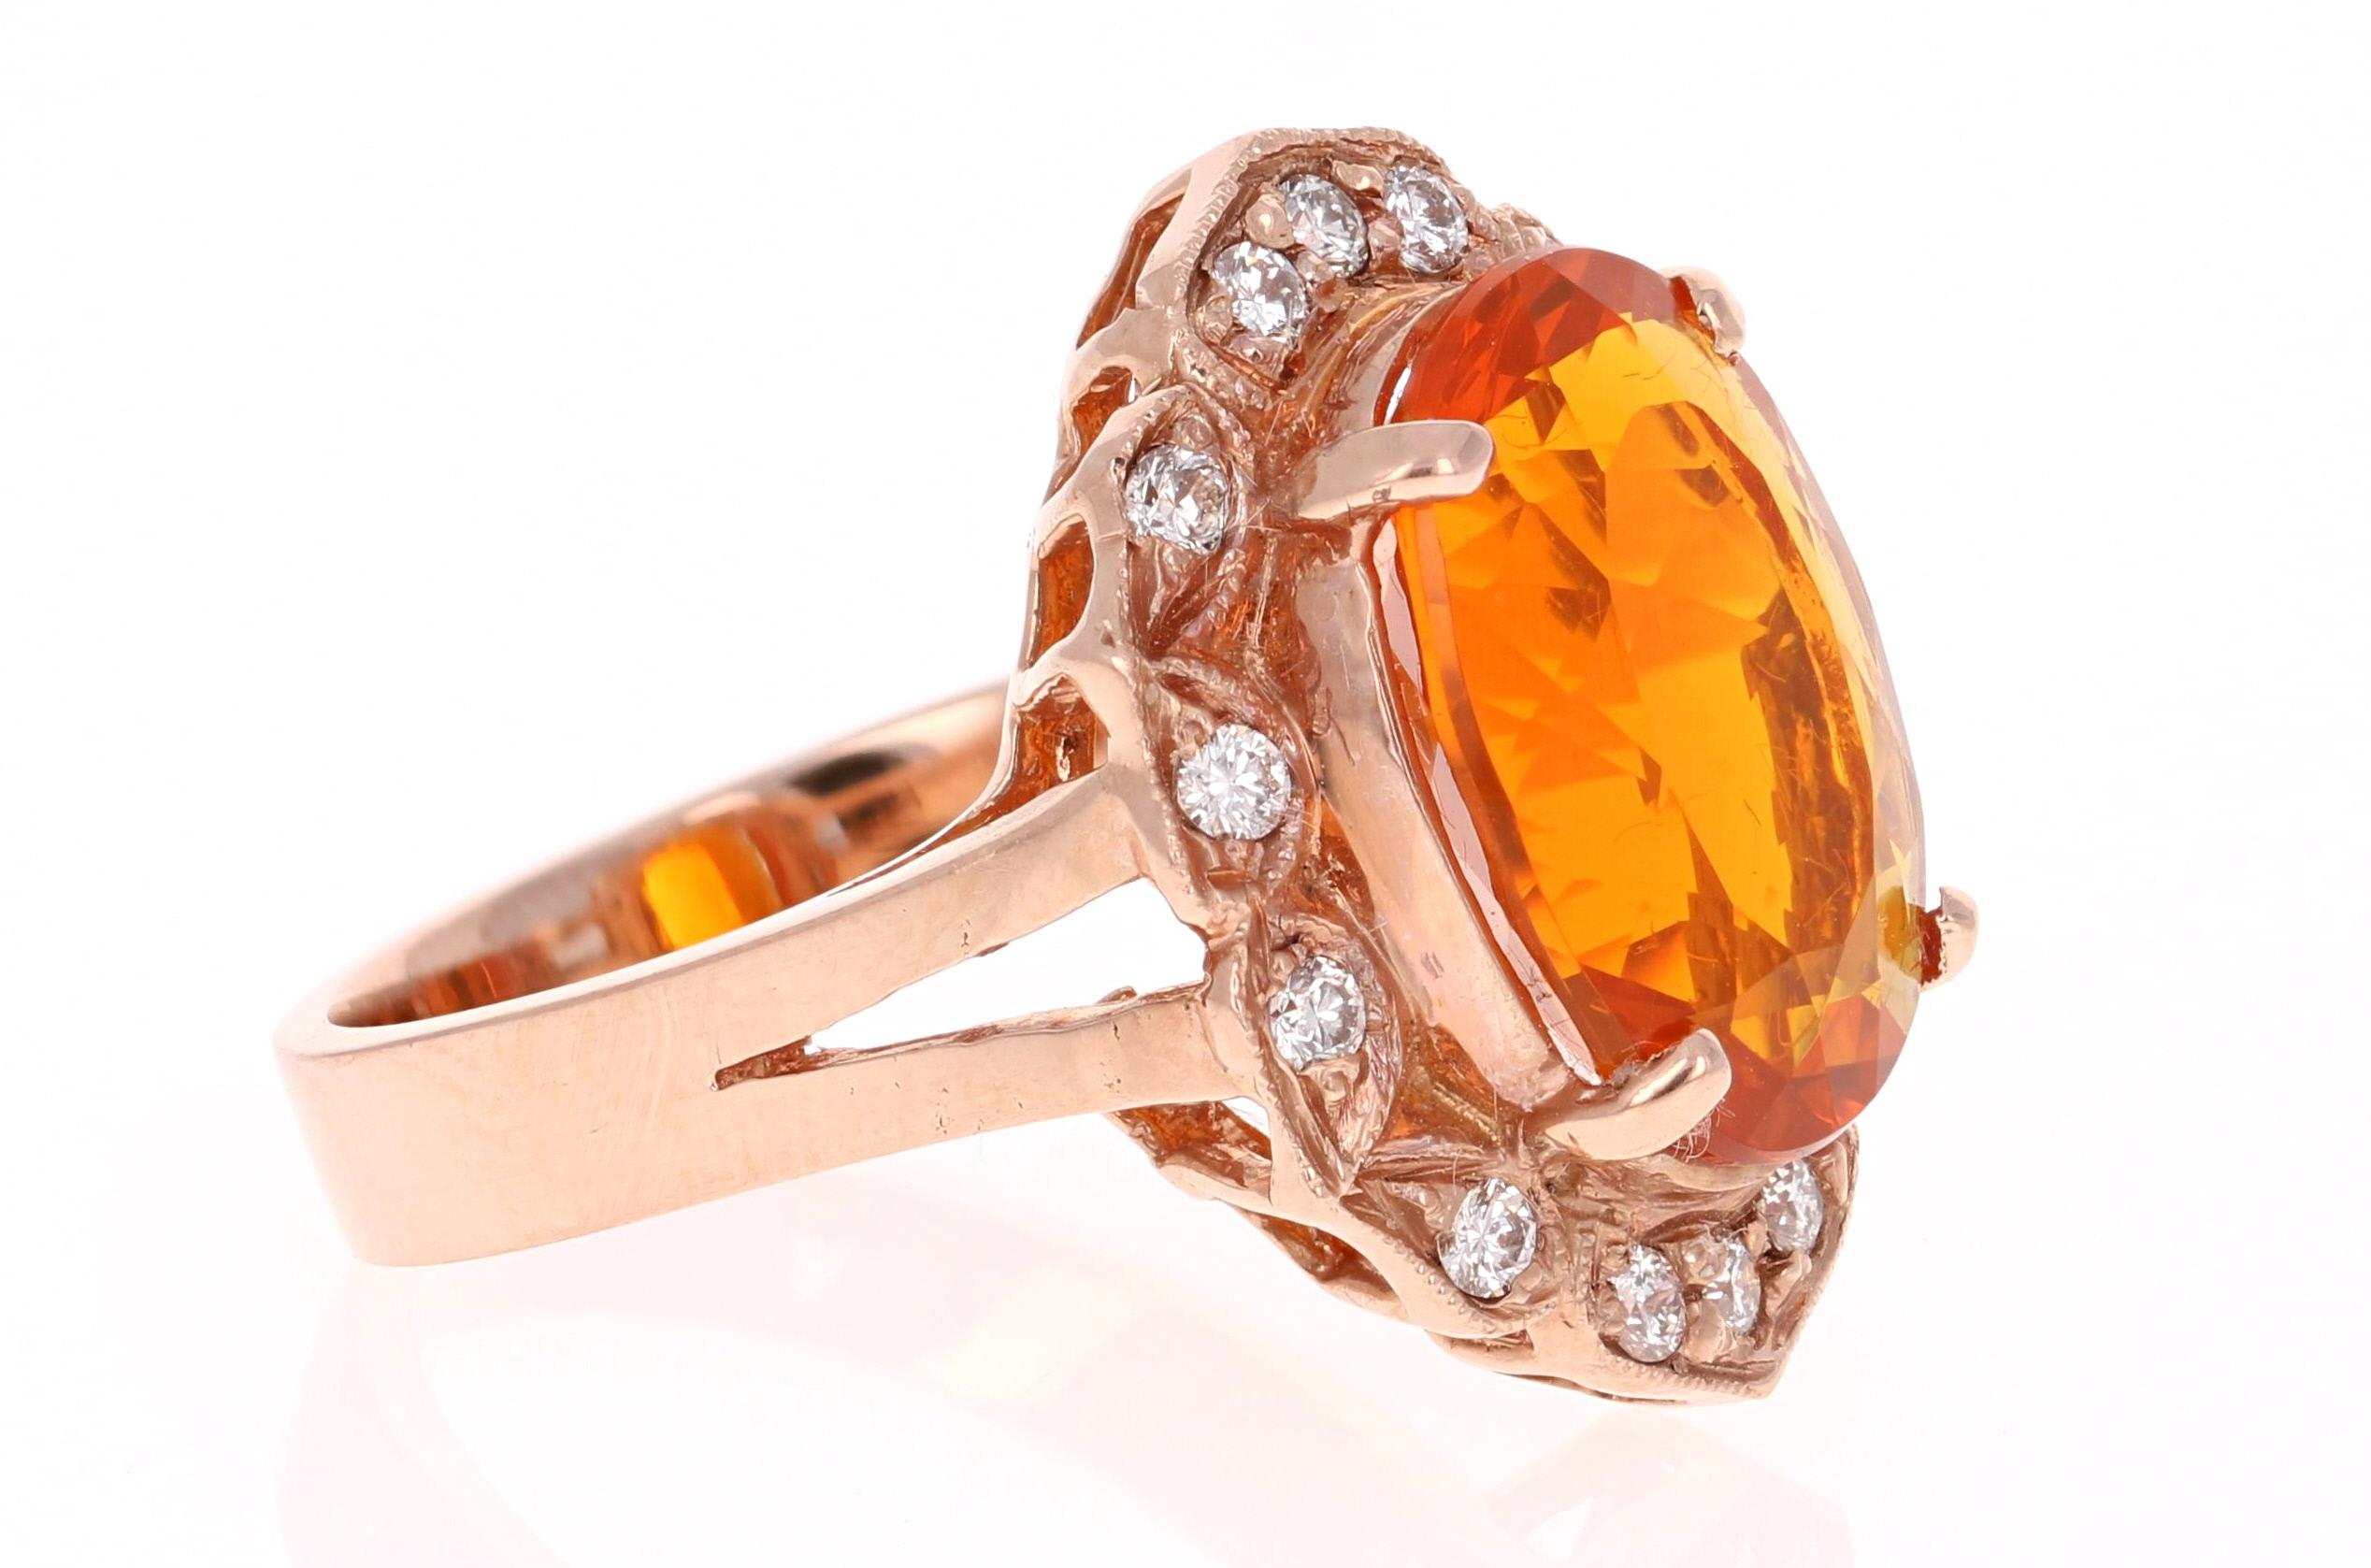 This stunningly ring has a beautiful Orange Oval Cut Fire Opal that weighs 3.97 Carats and 14 Round Cut Diamonds that weigh 0.30 Carats. The clarity and color of the diamonds are VS-H.  The total carat weight of the ring is 4.27 cts.  It is